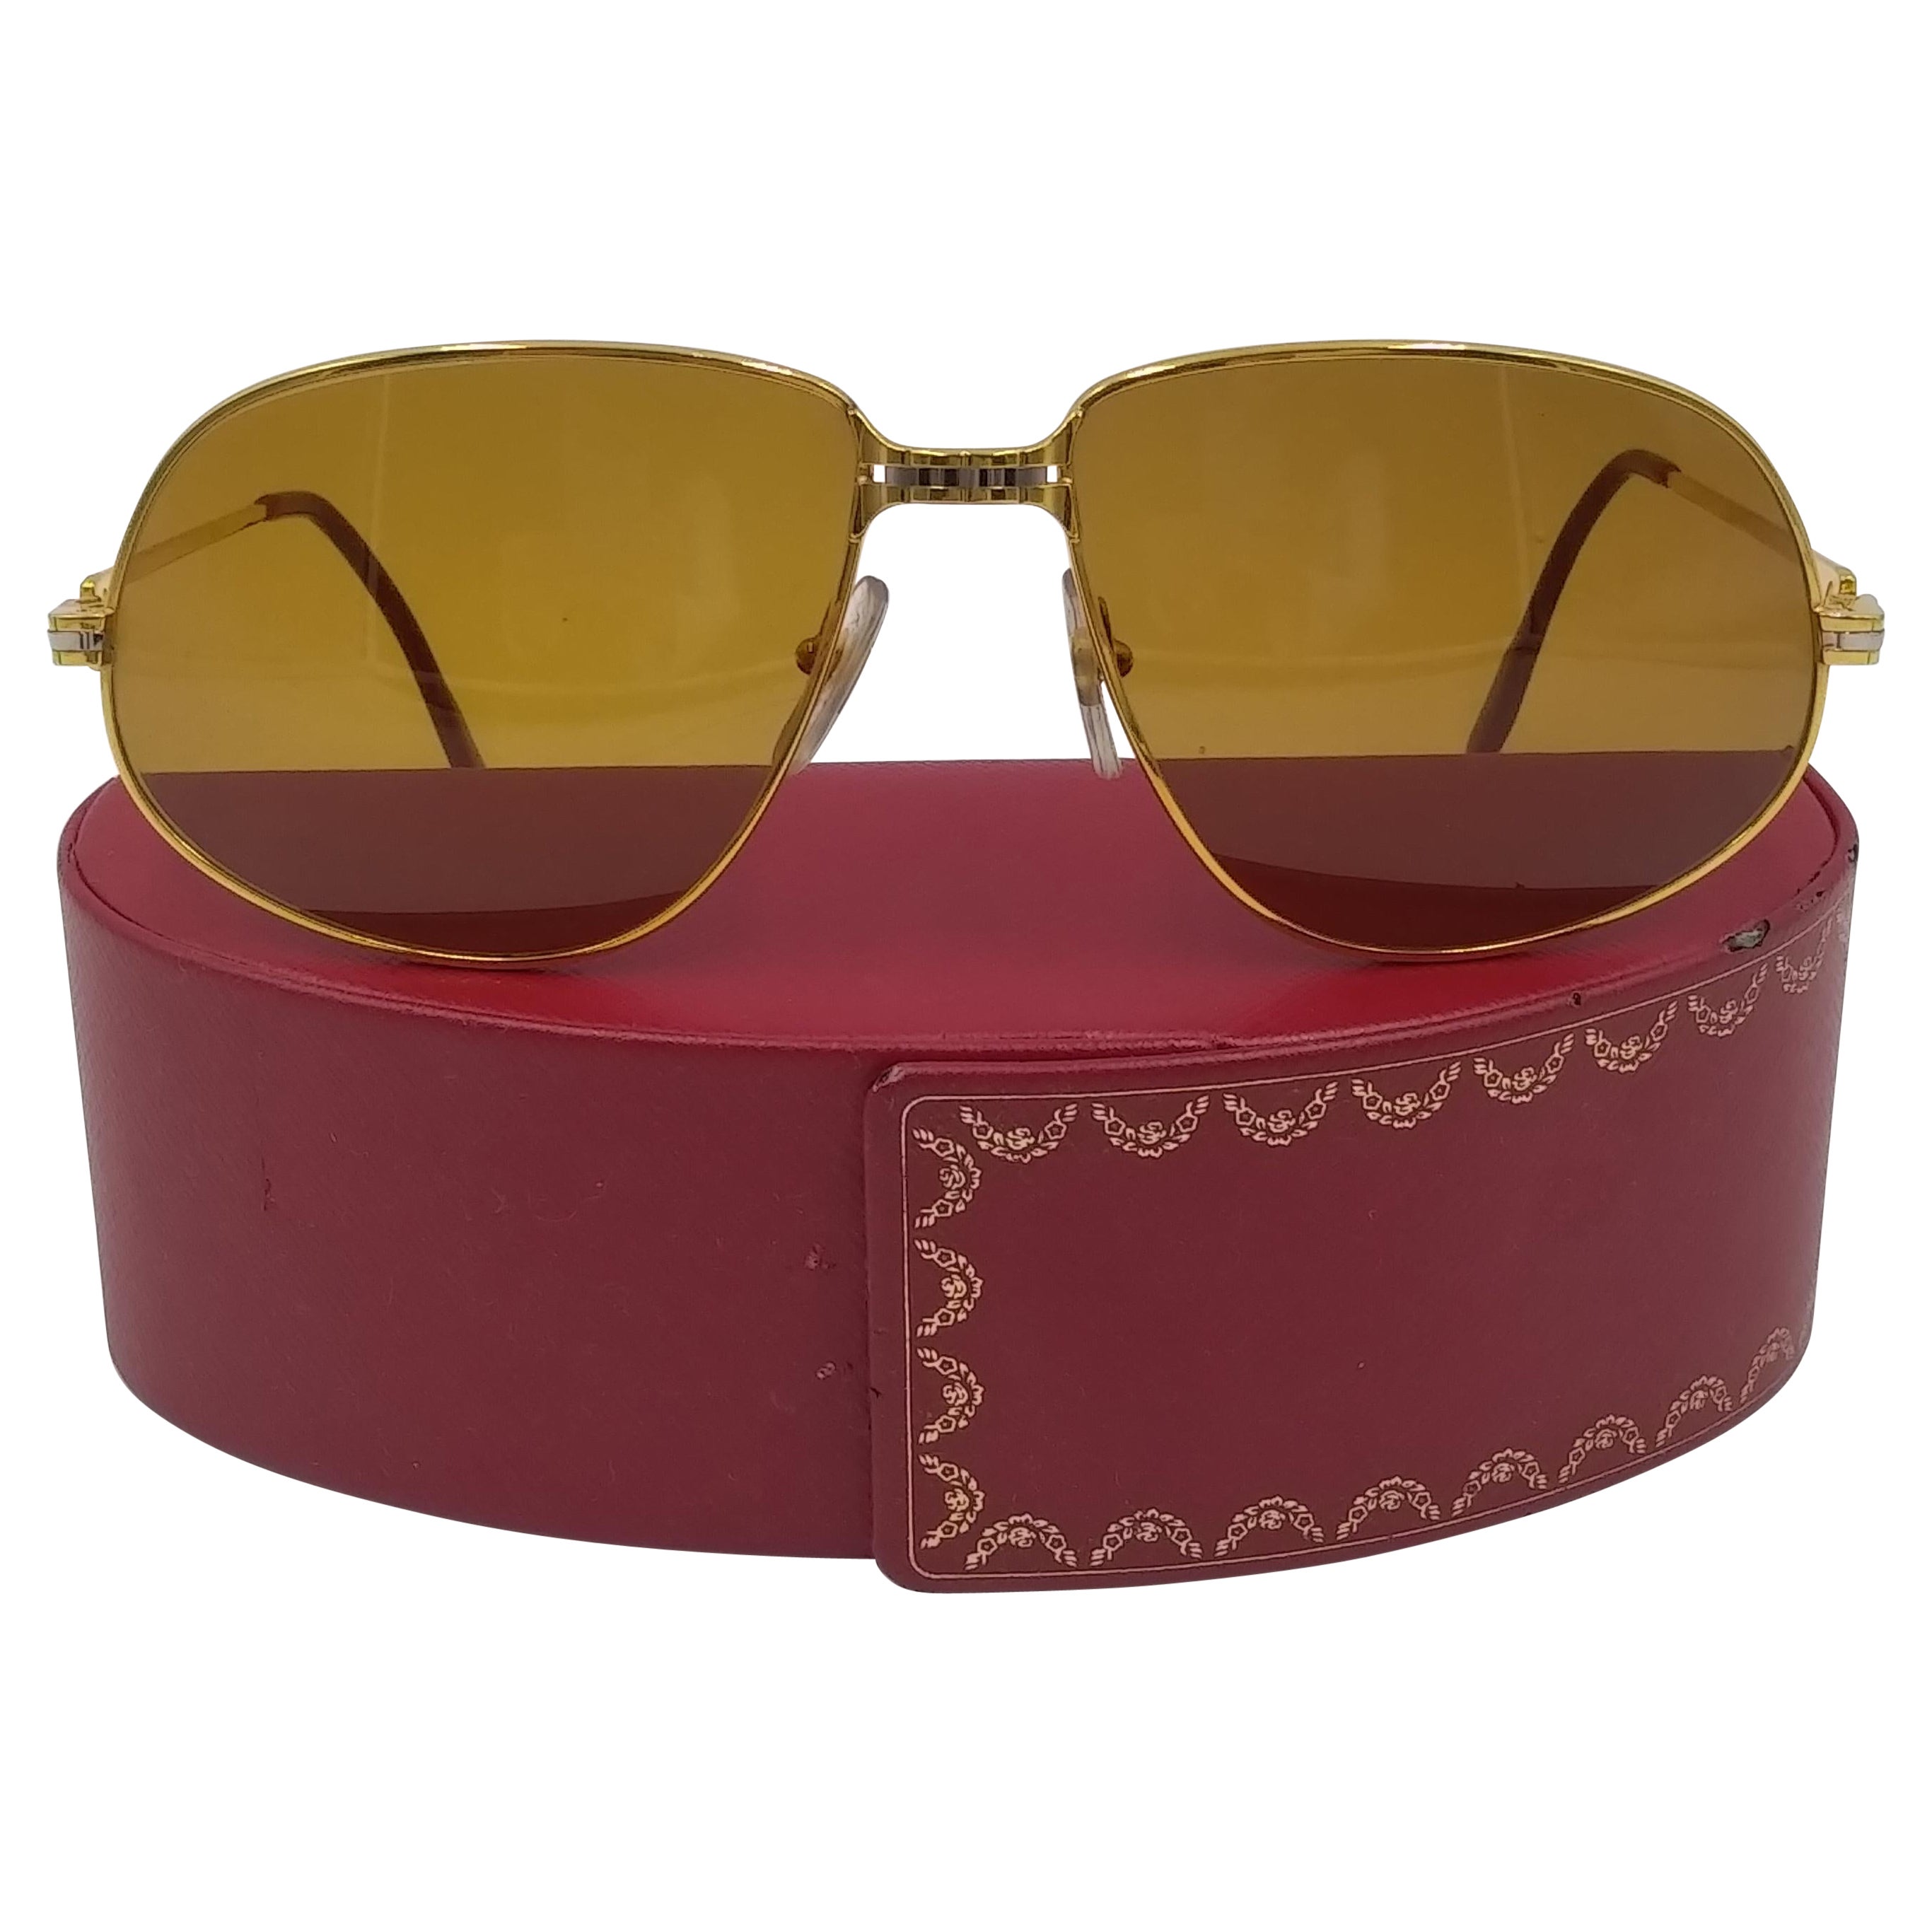 Cartier Panthere 63/16 Gold Plated Sunglasses, 1988